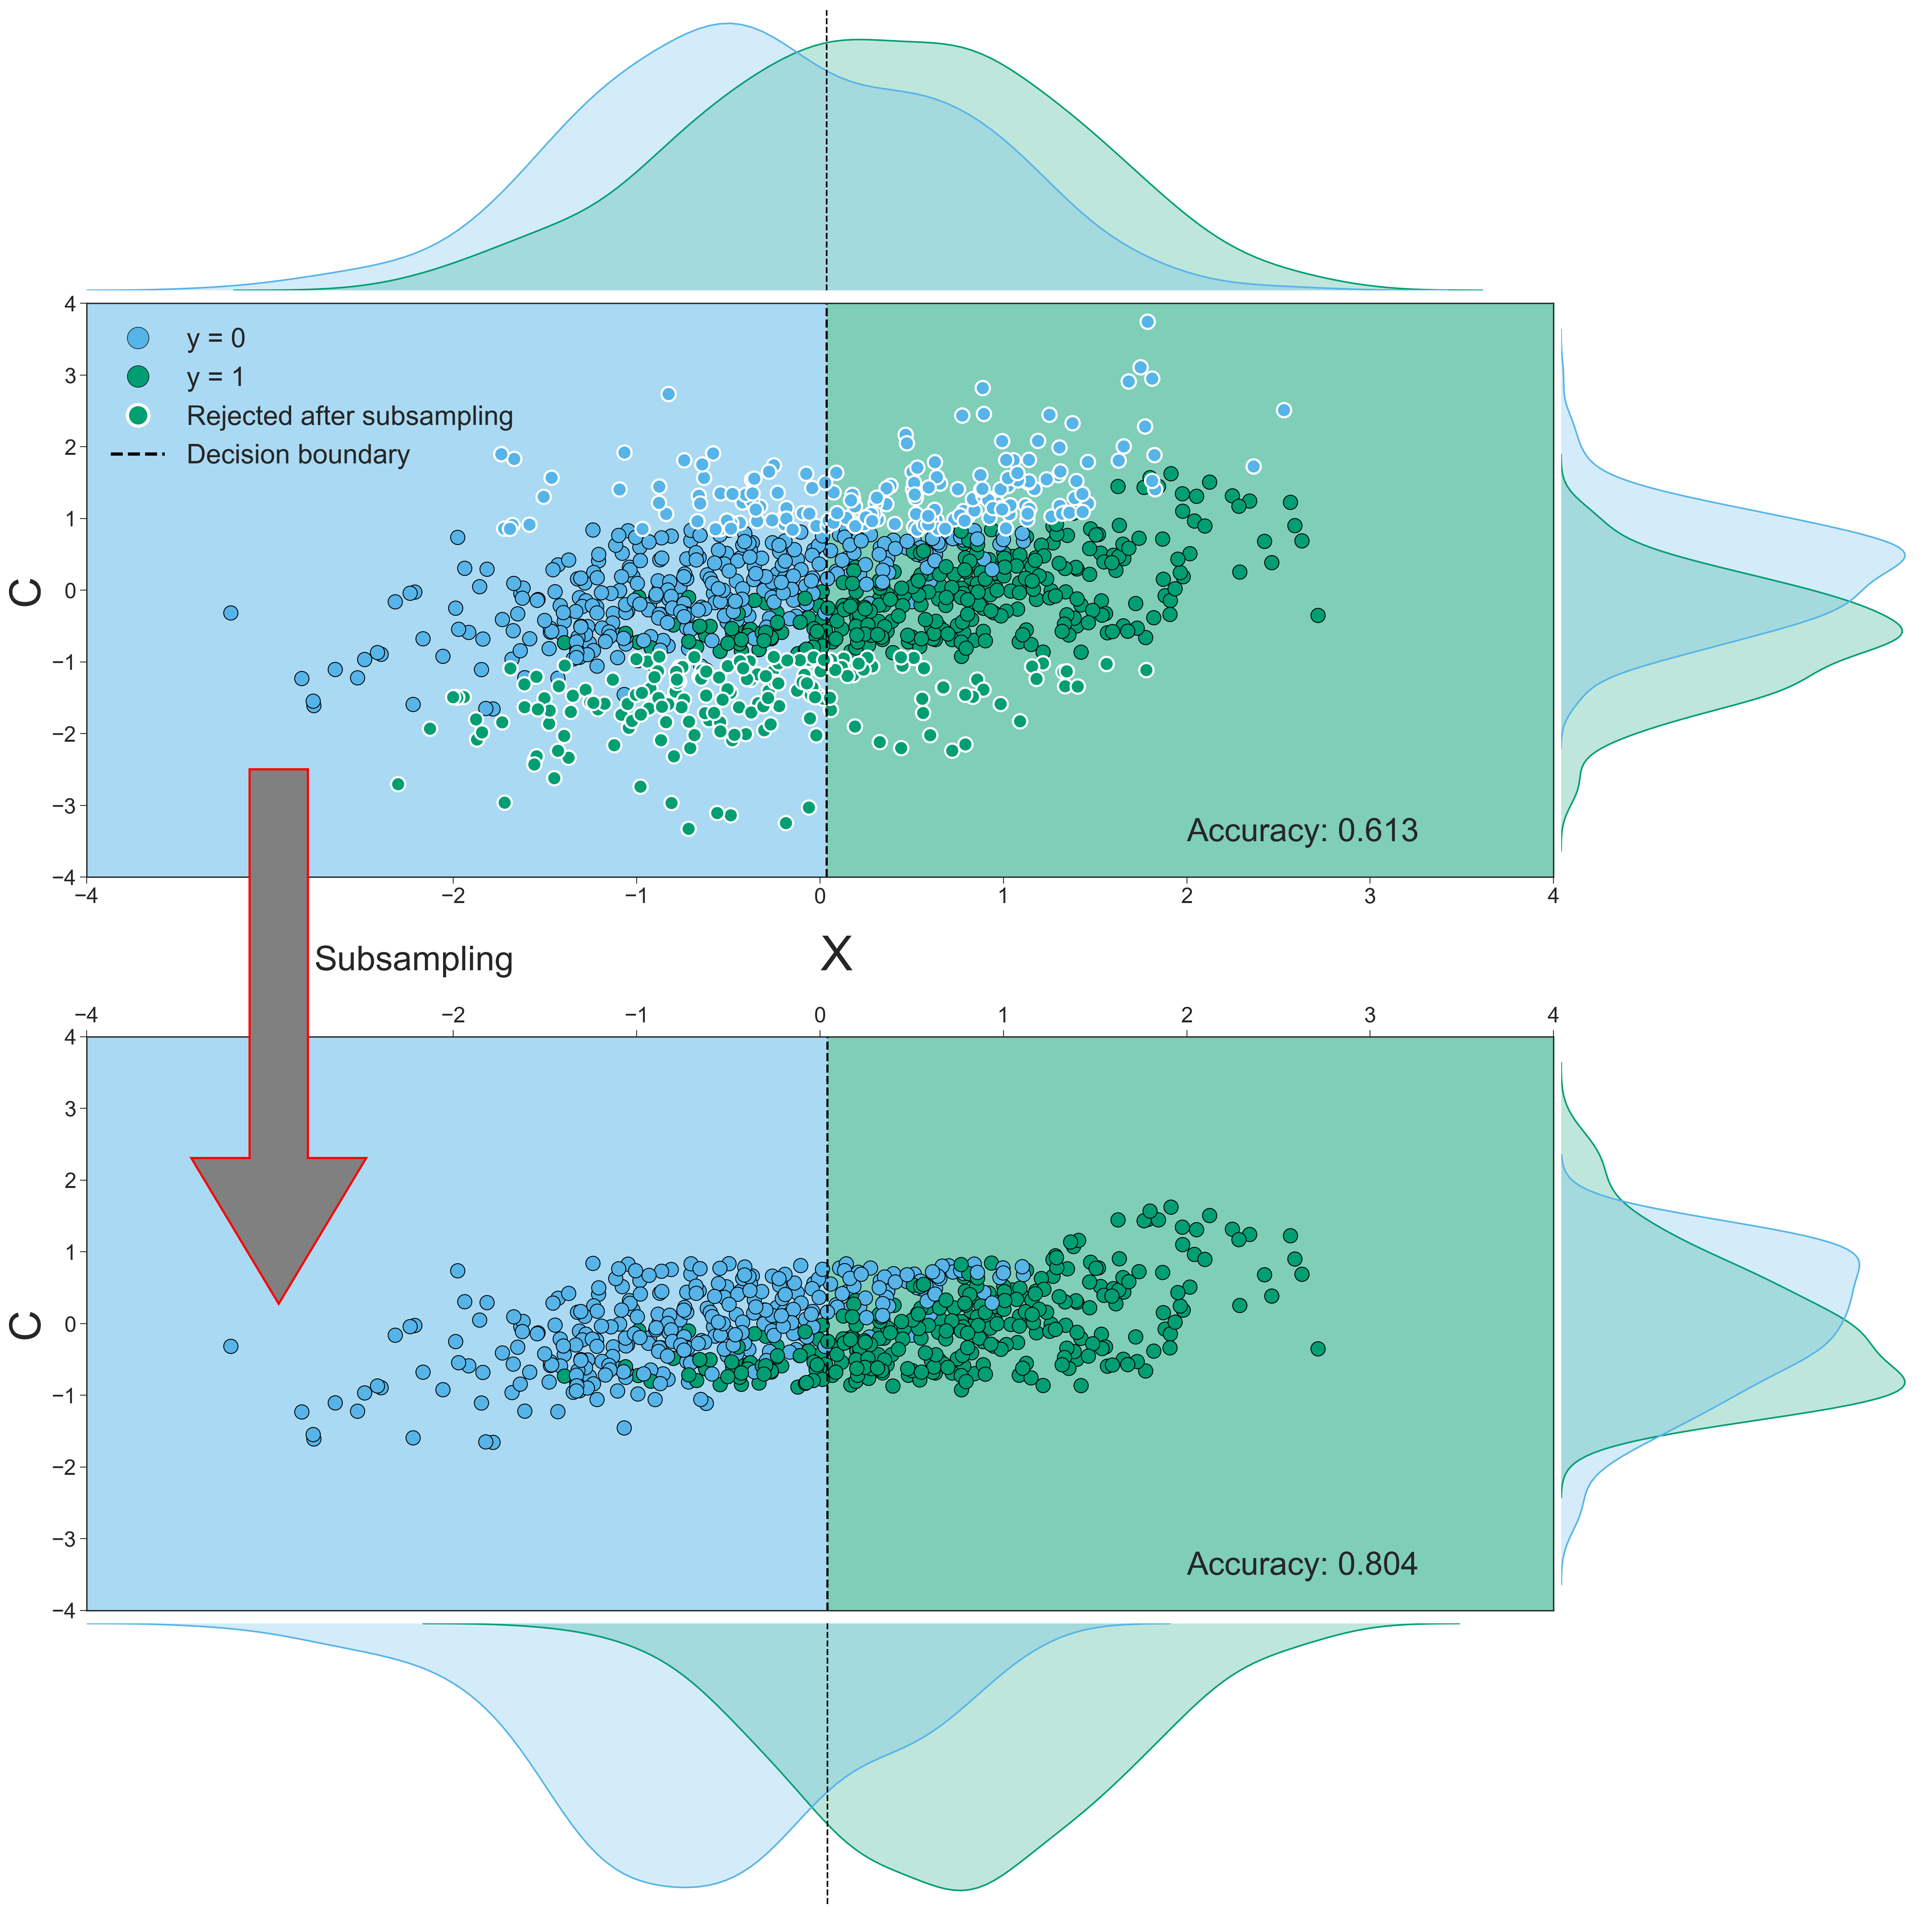 Both scatterplots visualize the relationship between the data (\(X\) with \(K=1\), on the x-axis), the confound (\(C\), on the y-axis) and the target (\(y\)). Dots with a white border in the upper scatterplot indicate samples that are rejected in the subsampling process; the lower scatterplot visualizes the data without these rejected samples. The dashed black lines in the scatterplot represent the decision boundary of the SVM classifier; the color of the background shows how samples in that area are classified (a blue background means a prediction of \(y = 0\) and a green background means a prediction of \(y = 1\)). The density plots parallel to the y-axis depict the distribution of the confound (\(C\)) for the samples in which \(y = 0\) (blue) and in which \(y = 1\) (green). The density plots parallel to x-axis depict the distribution of the data (\(X\)) for the samples in which \(y = 0\) (blue) and in which \(y = 1\) (green). Density estimates are obtained by kernel density estimation with a Gaussian kernel and Scott’s rule (Scott, 1979) for bandwidth selection.